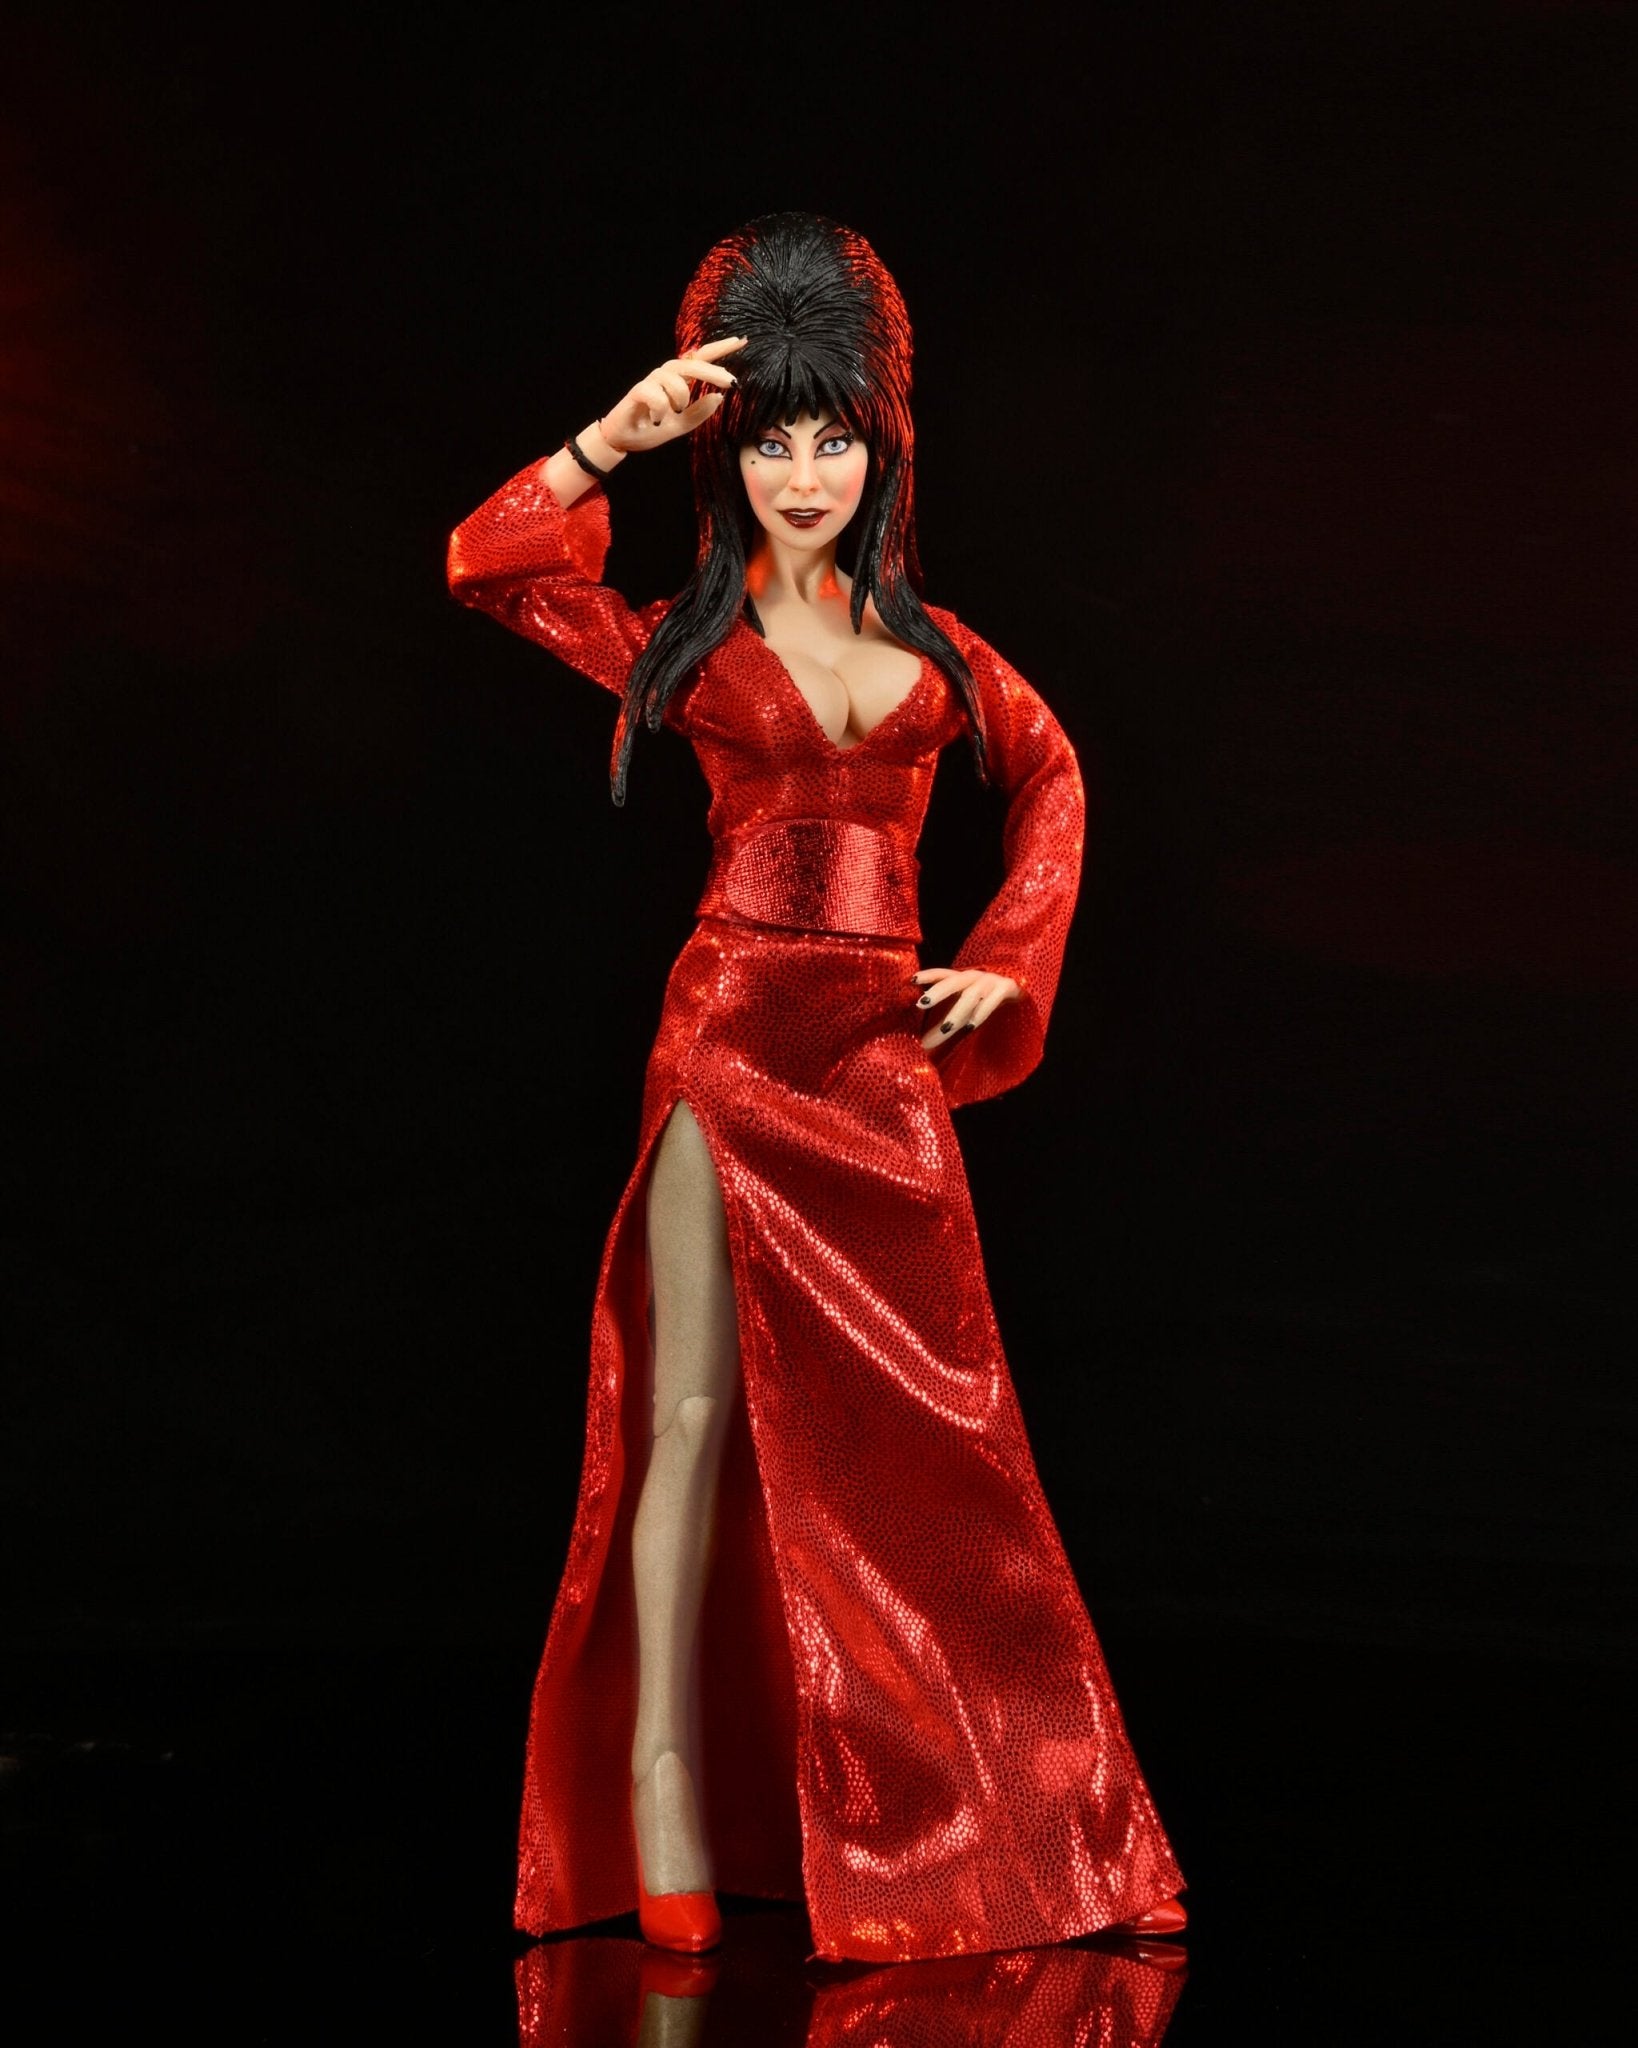 NECA Elvira Mistress of the Dark (Red, Fright, and Boo) 634482560808 - King Card Canada